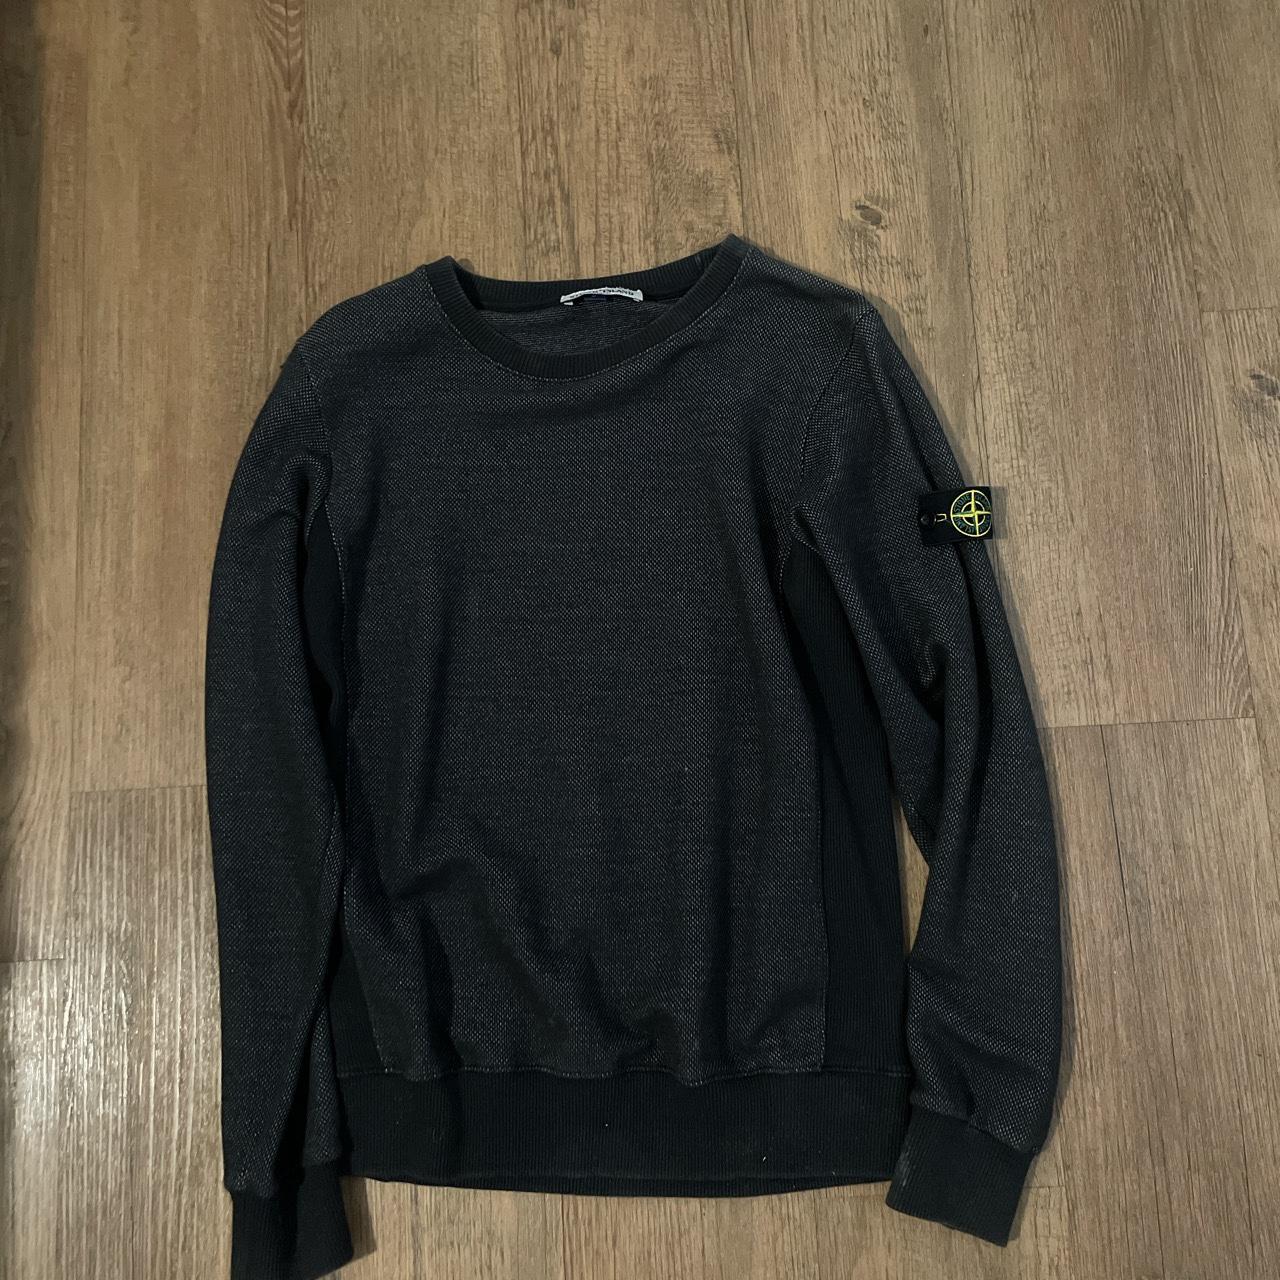 stone island jumper really old going cheap want it... - Depop